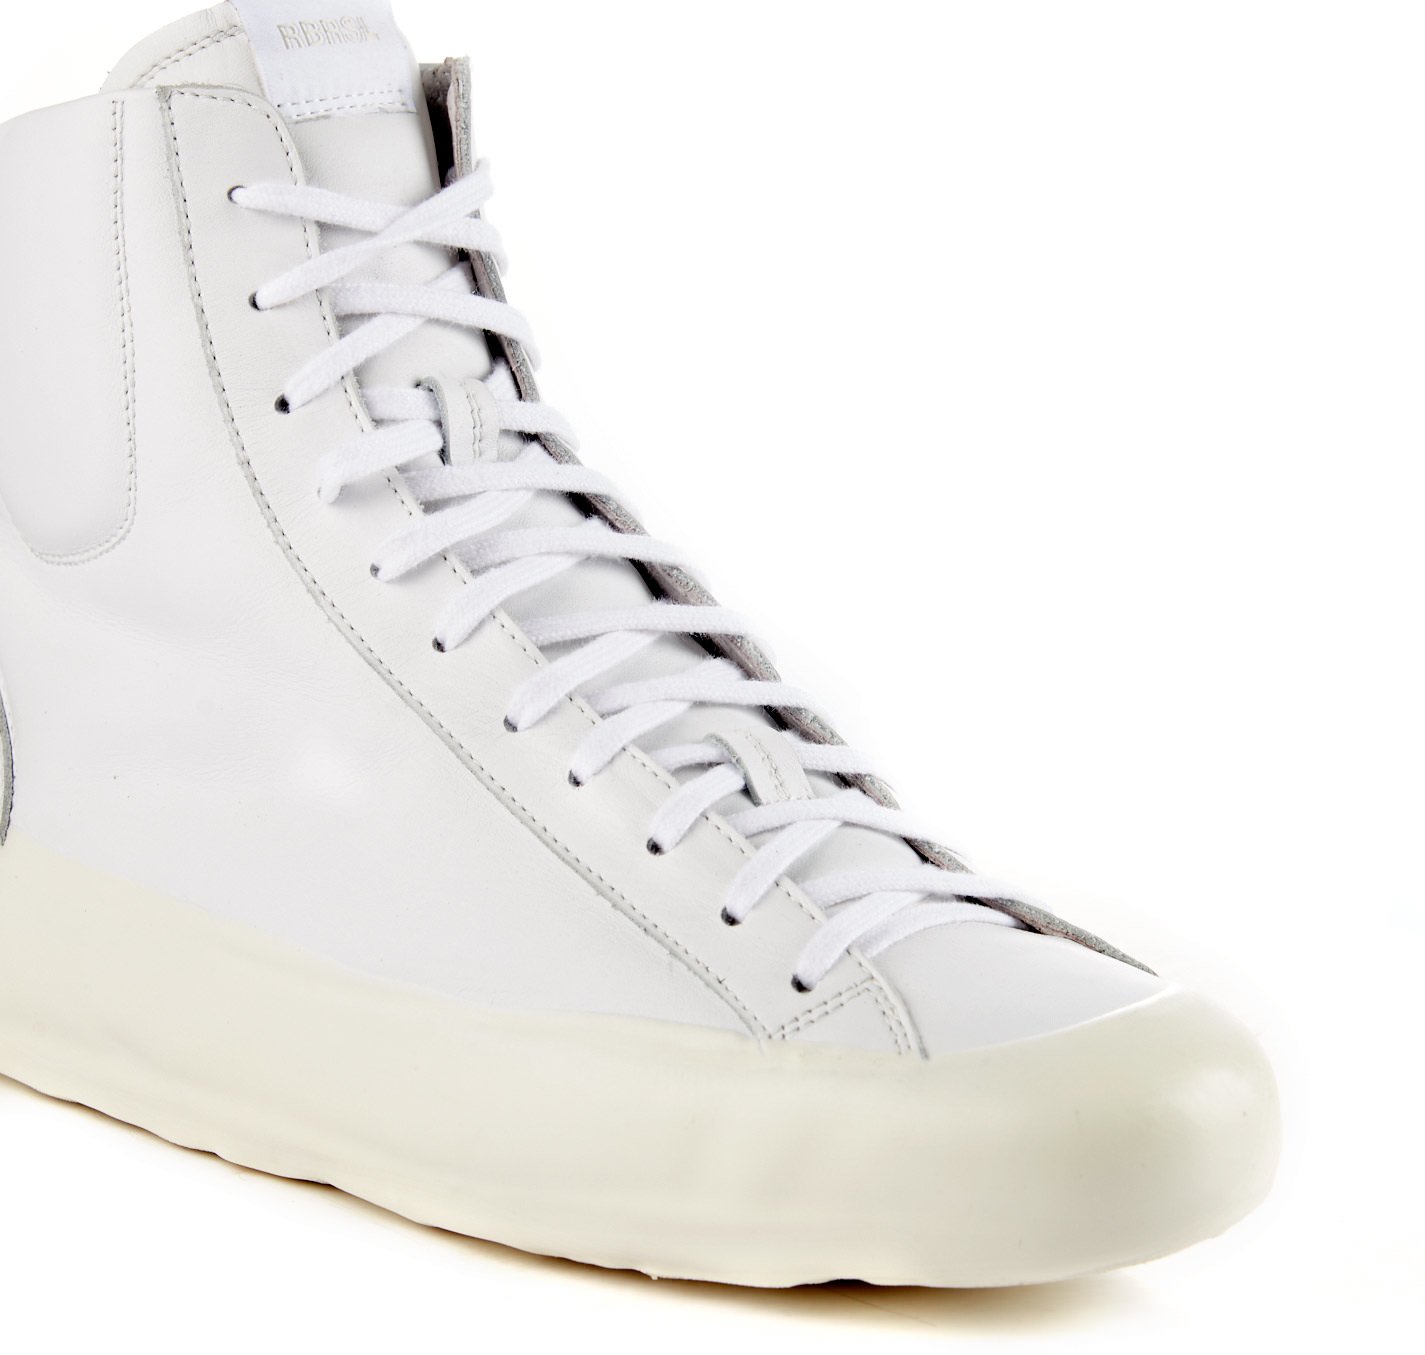 RBRSL Rubber Soul -Man -RBRSL classic white ankle boots with inner zip